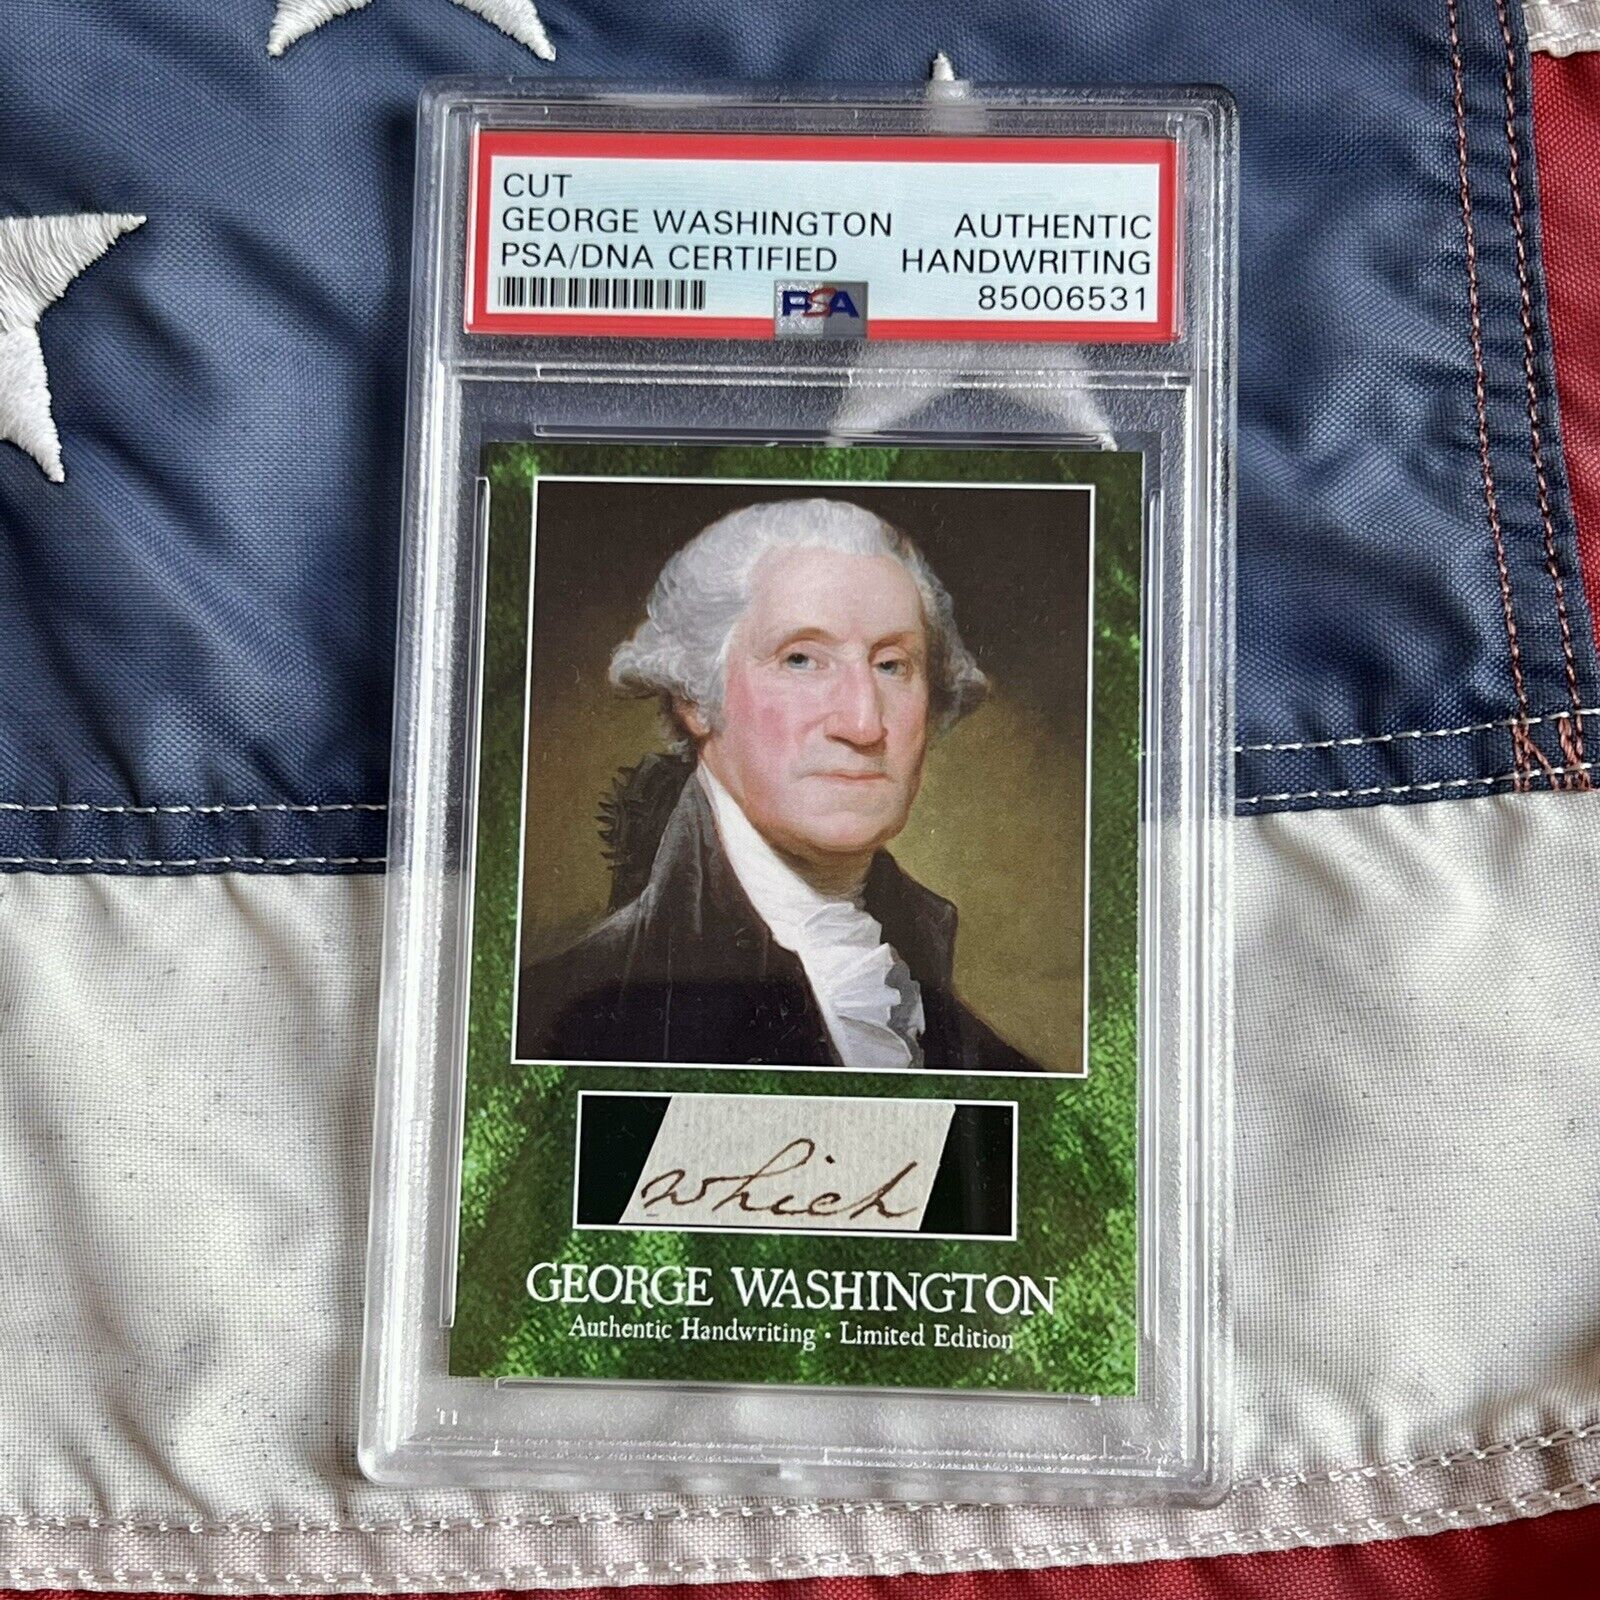 George Washington Handwritten Word Removed From an Autograph Letter Signed